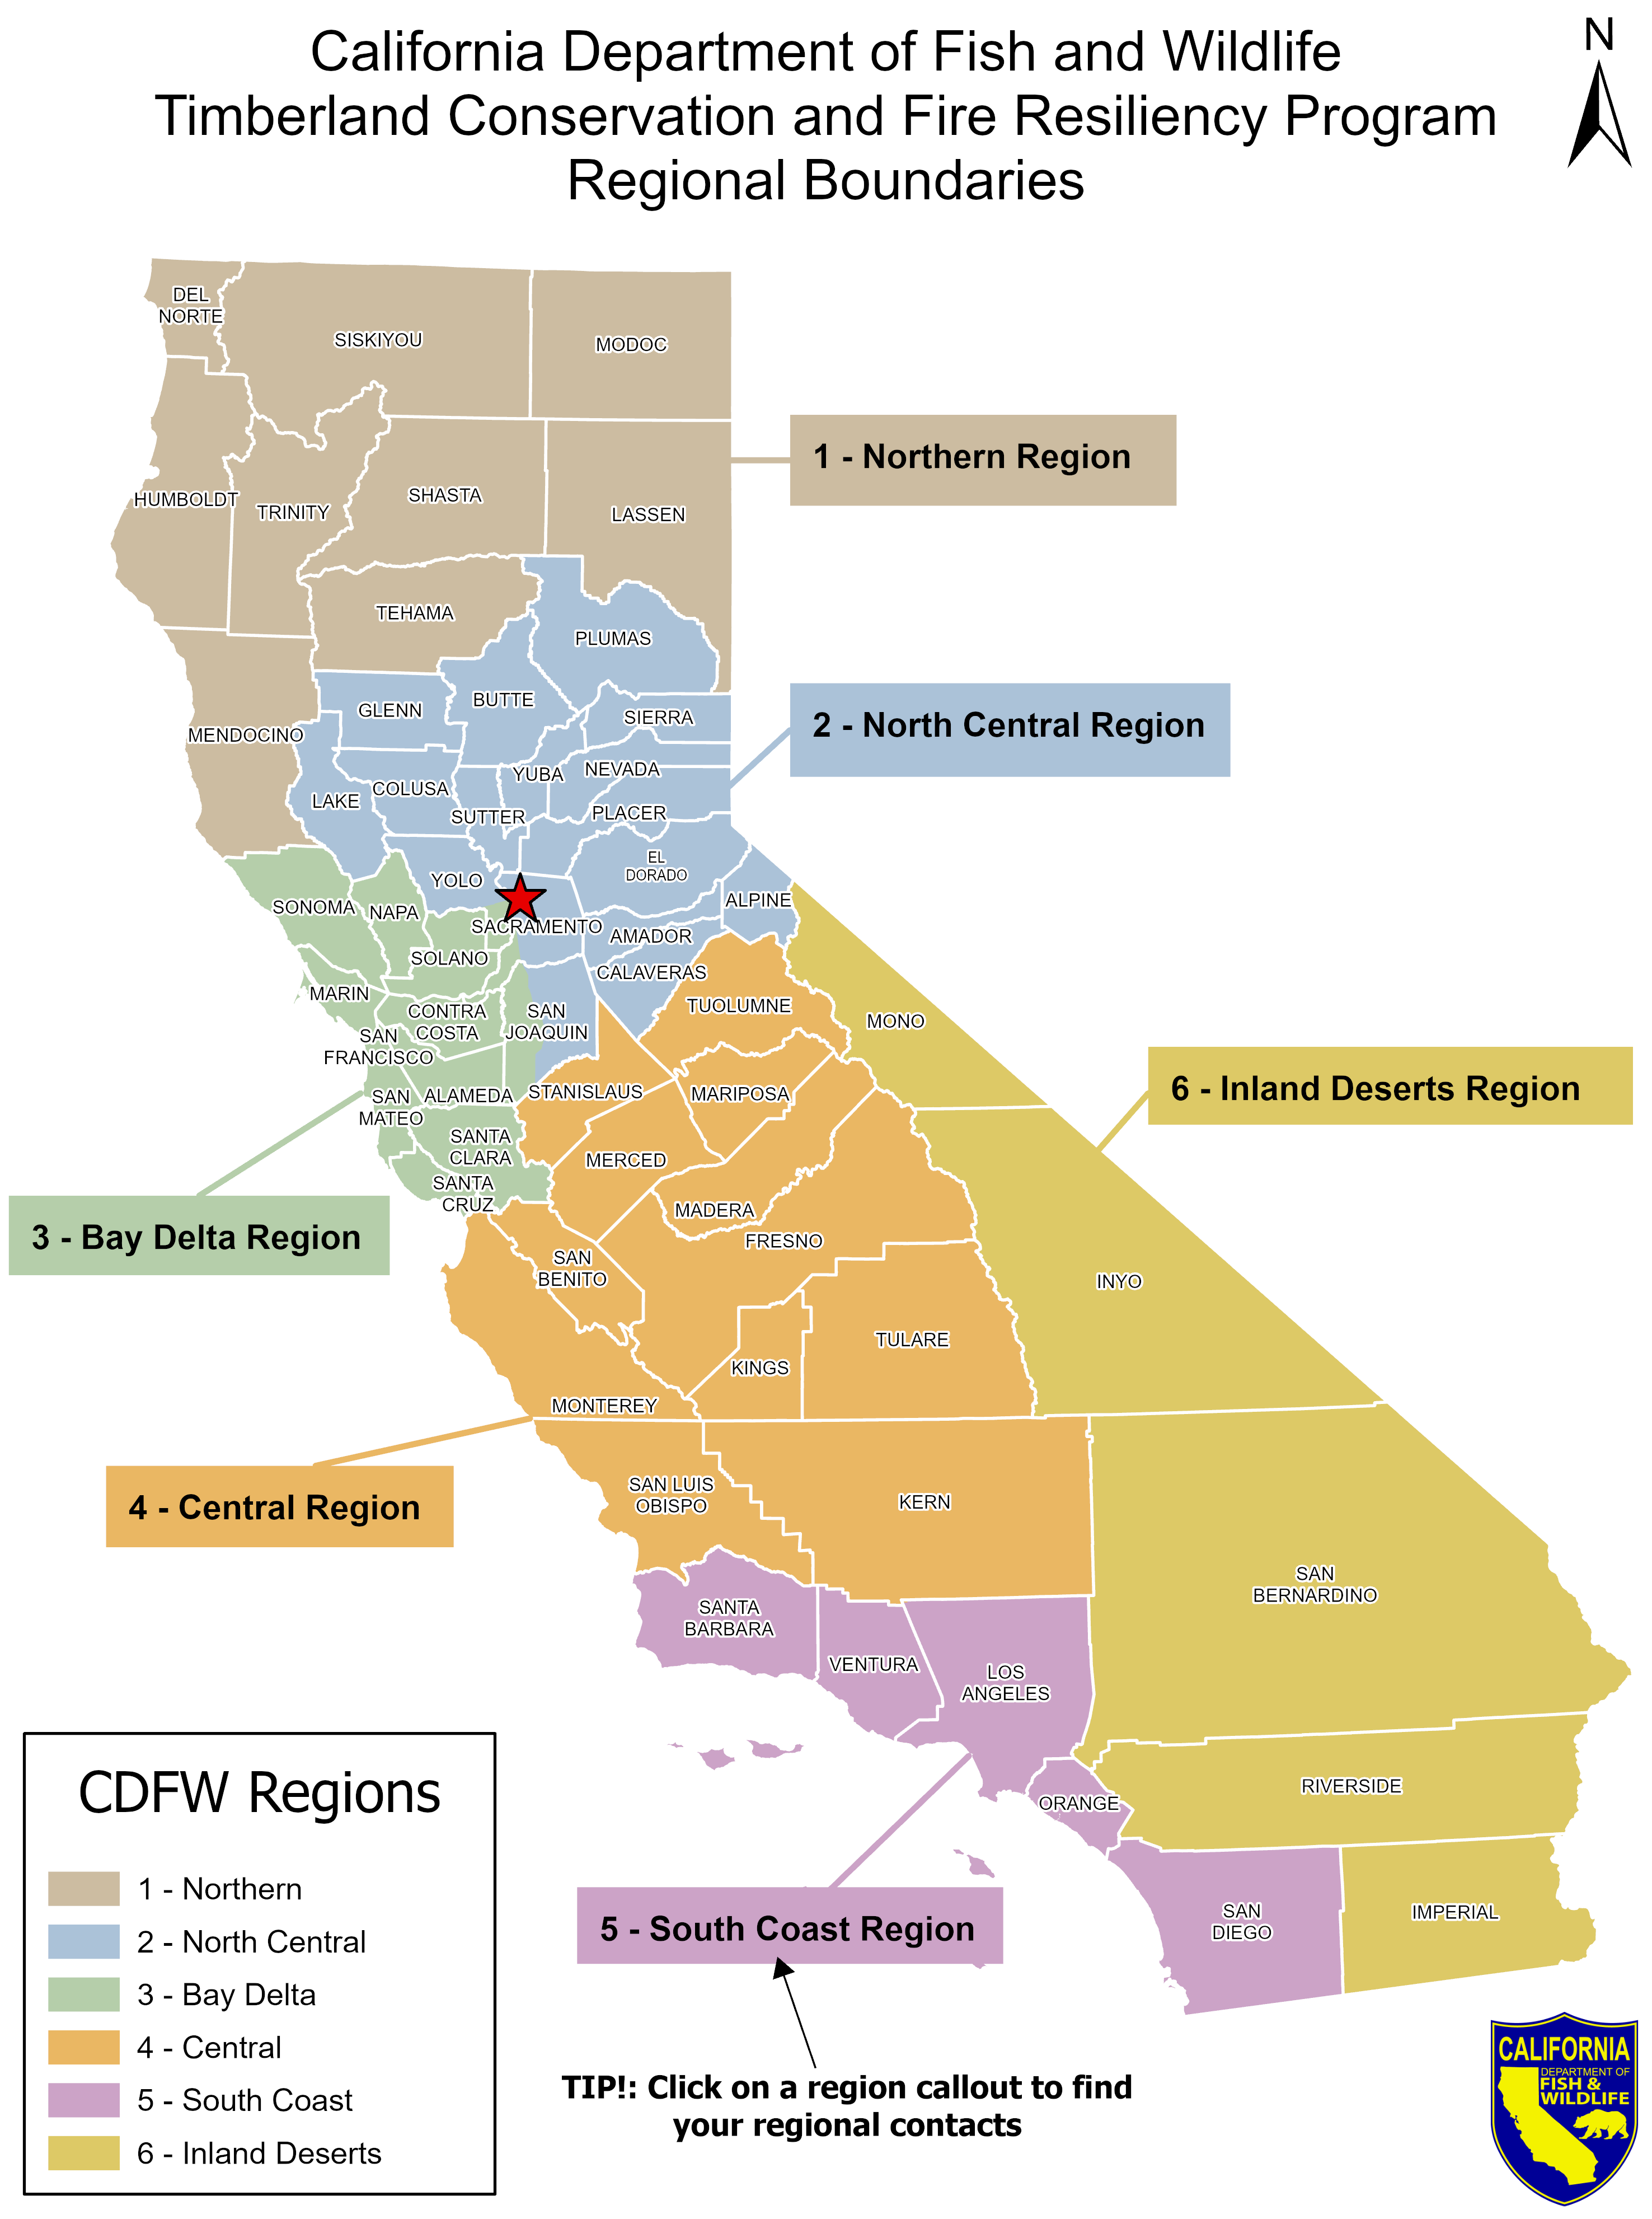 Map of Timberland Conservation and Fire Resiliency Regions - click to open in new window